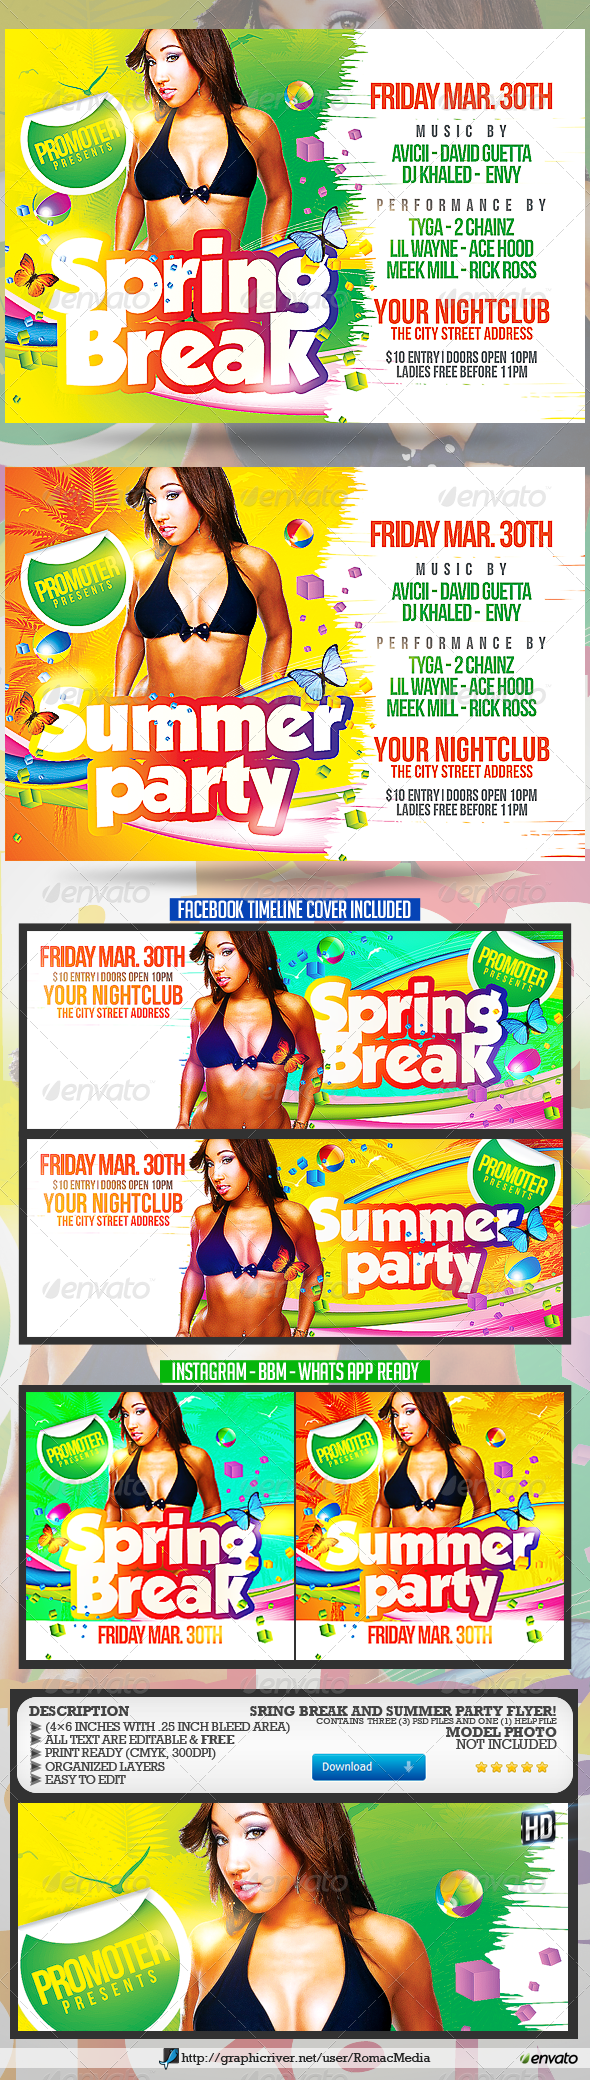 Spring Break and Summer Party Flyer